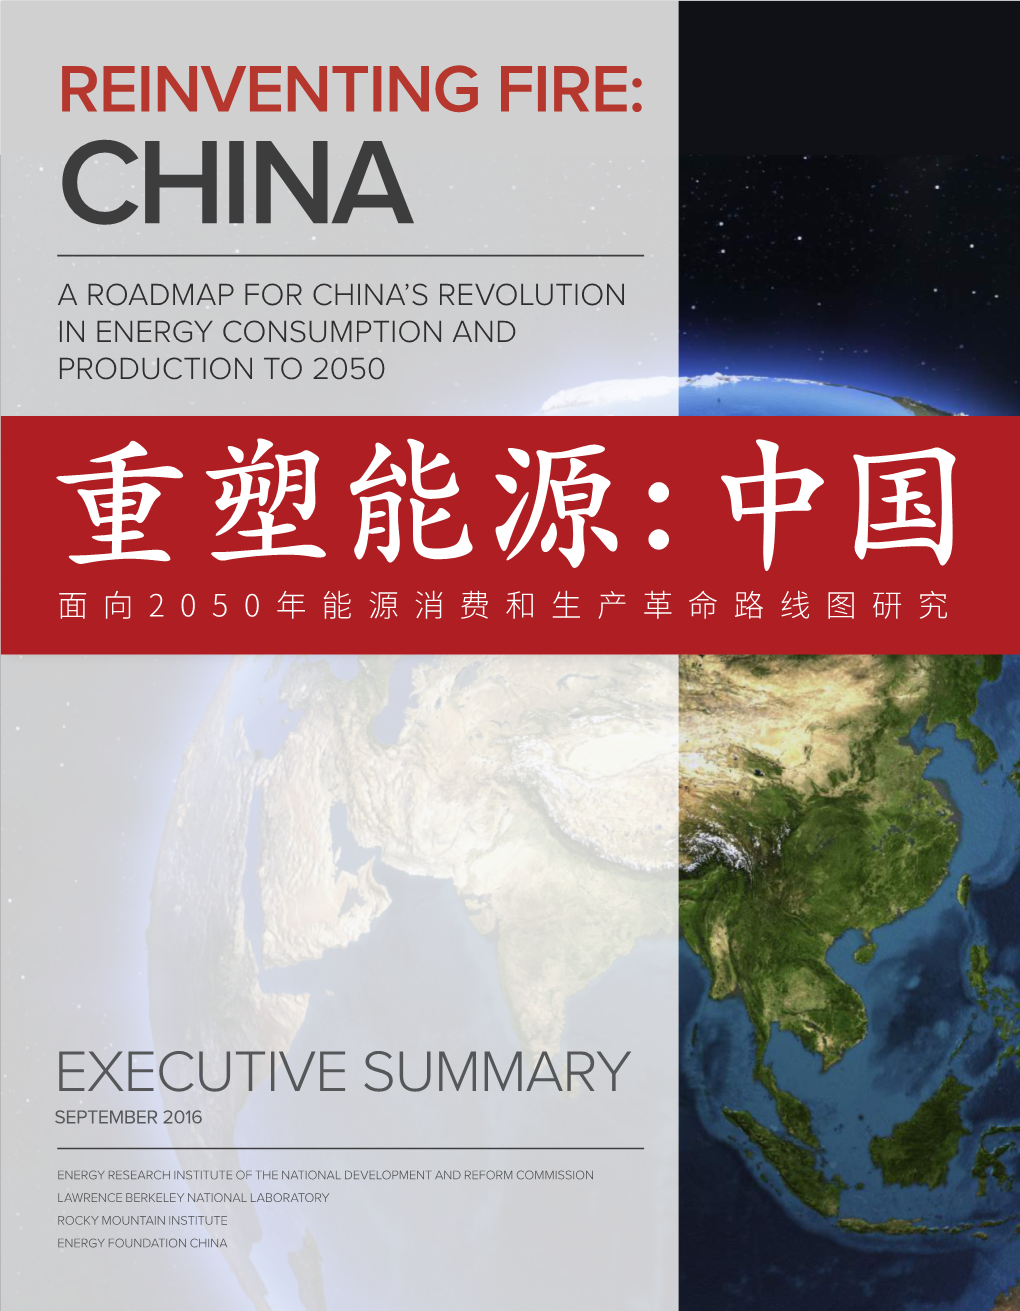 Reinventing Fire: China a Roadmap for China’S Revolution in Energy Consumption and Production to 2050 重塑能源：中国 ꬗ぢ䎃腊彂嶊餩ㄤ欰❡ꬠㄐ騟絁㕃灇瑕